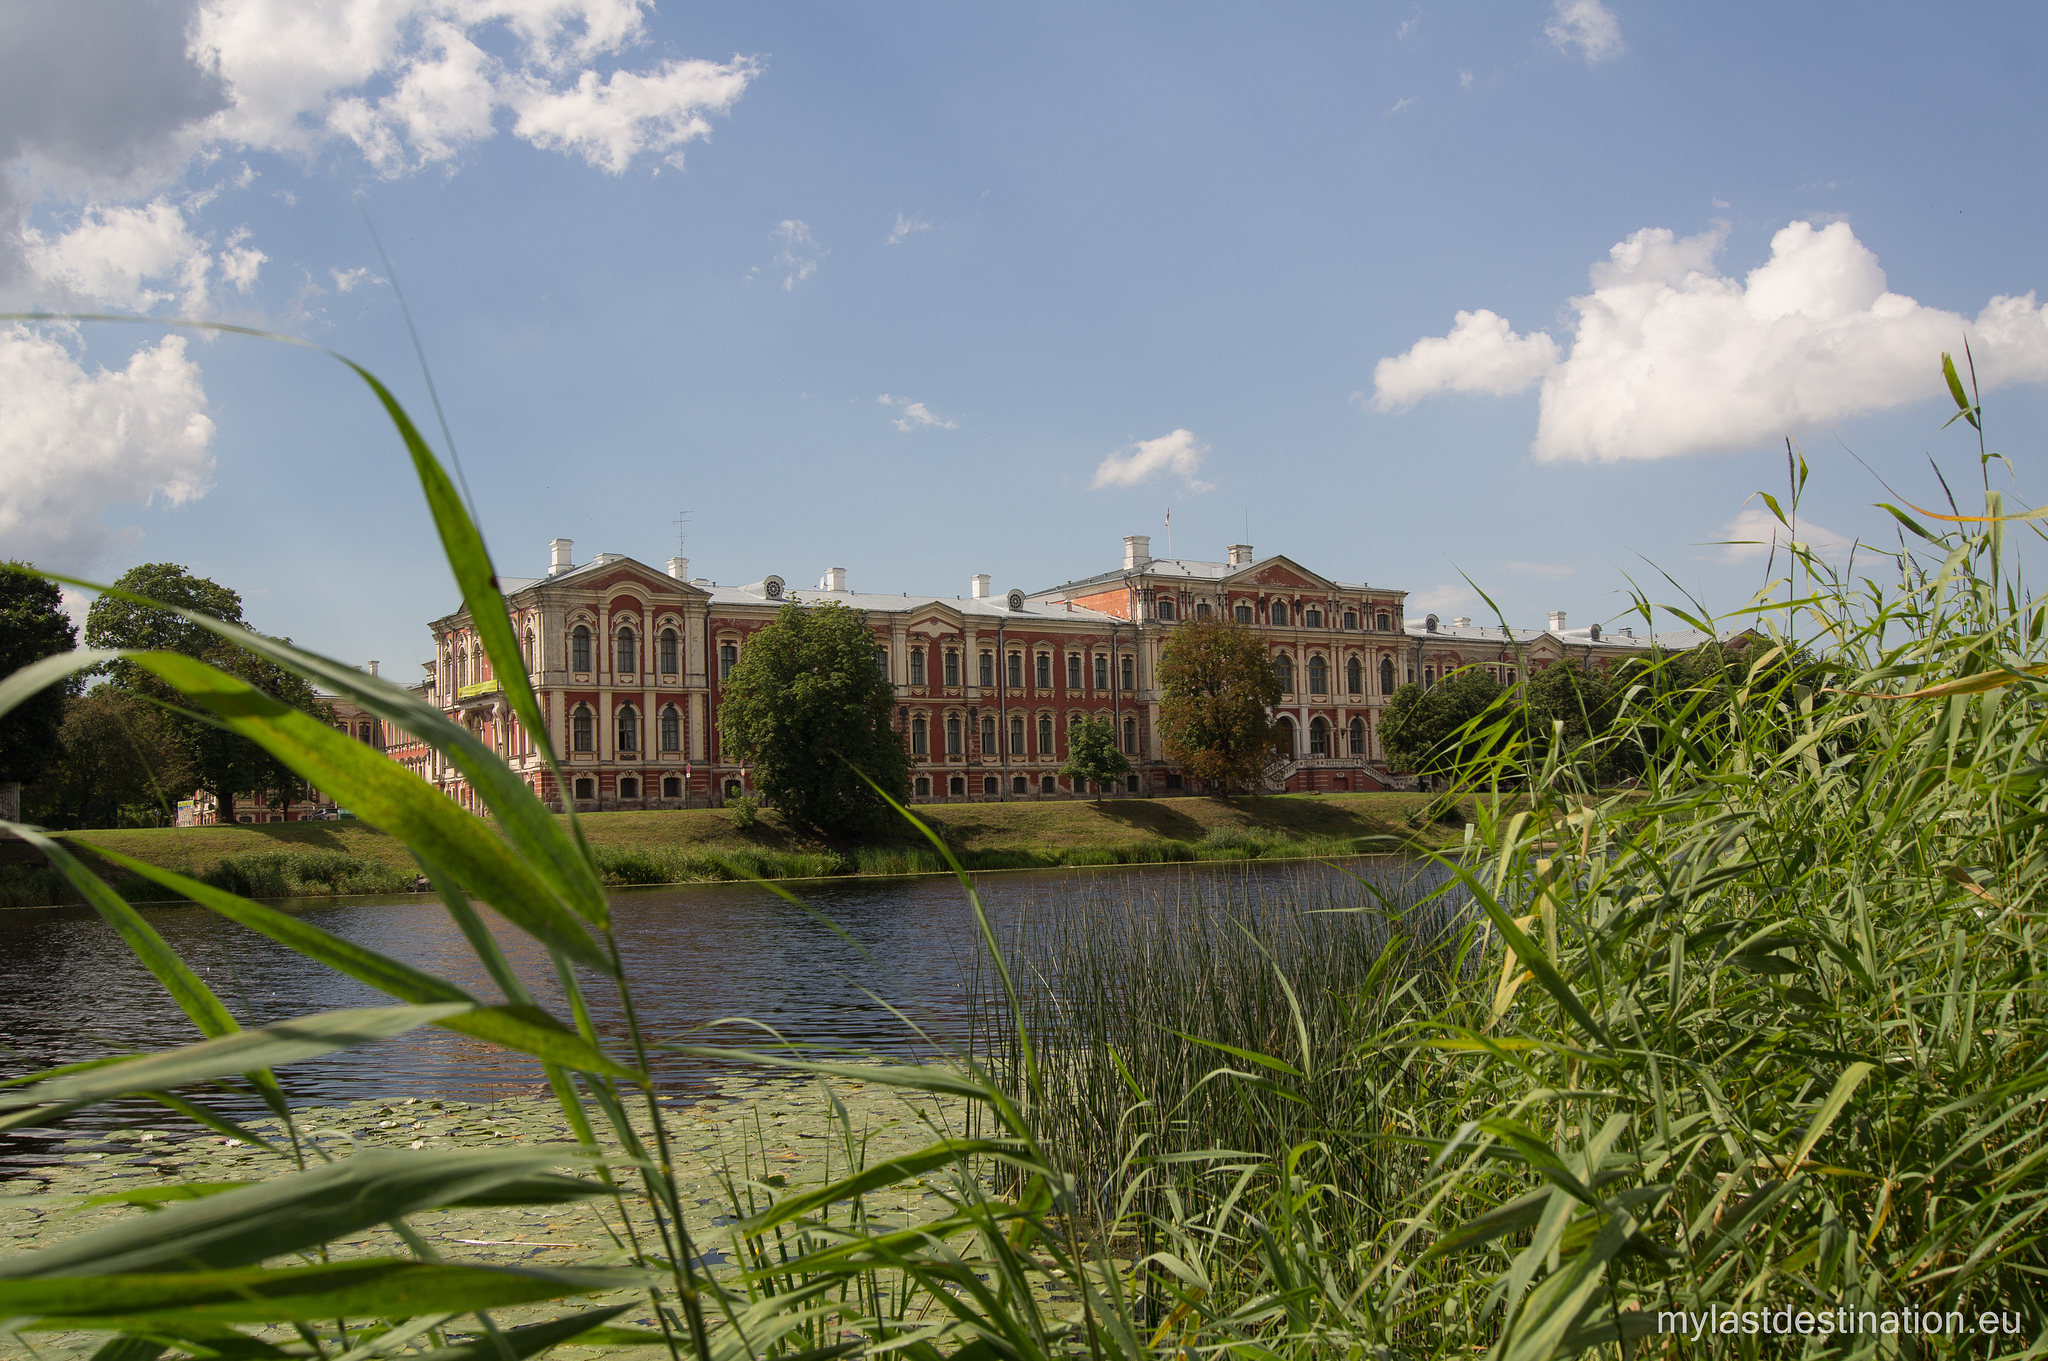 The palace from the other river bank (Jelgava, Latvia) BY Guillame Speurt CC Flickr